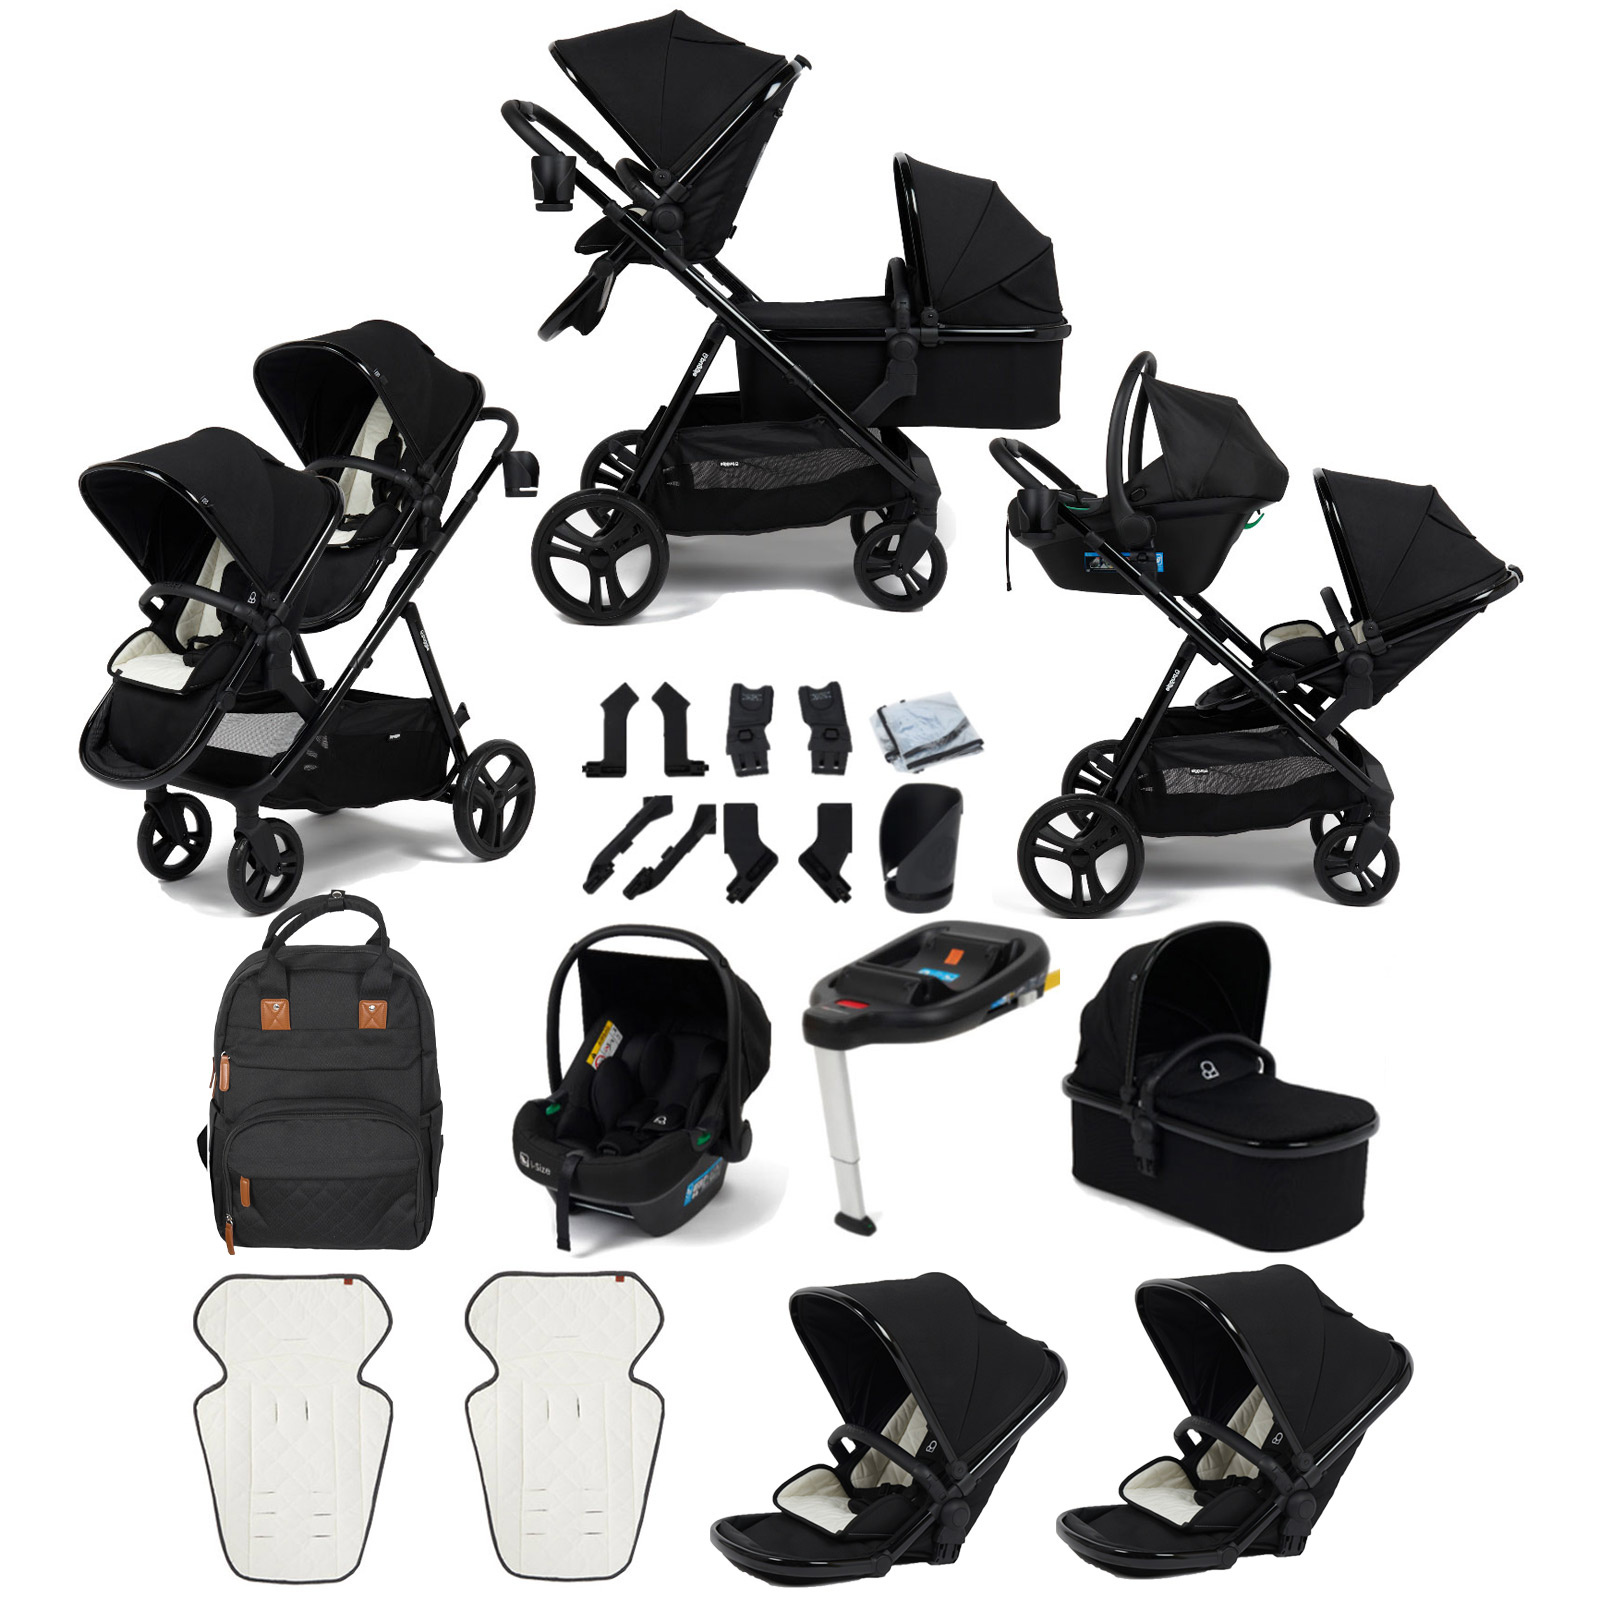 Puggle Memphis 3-in-1 Duo i-Size Double Travel System With ISOFIX Base - Midnight Black